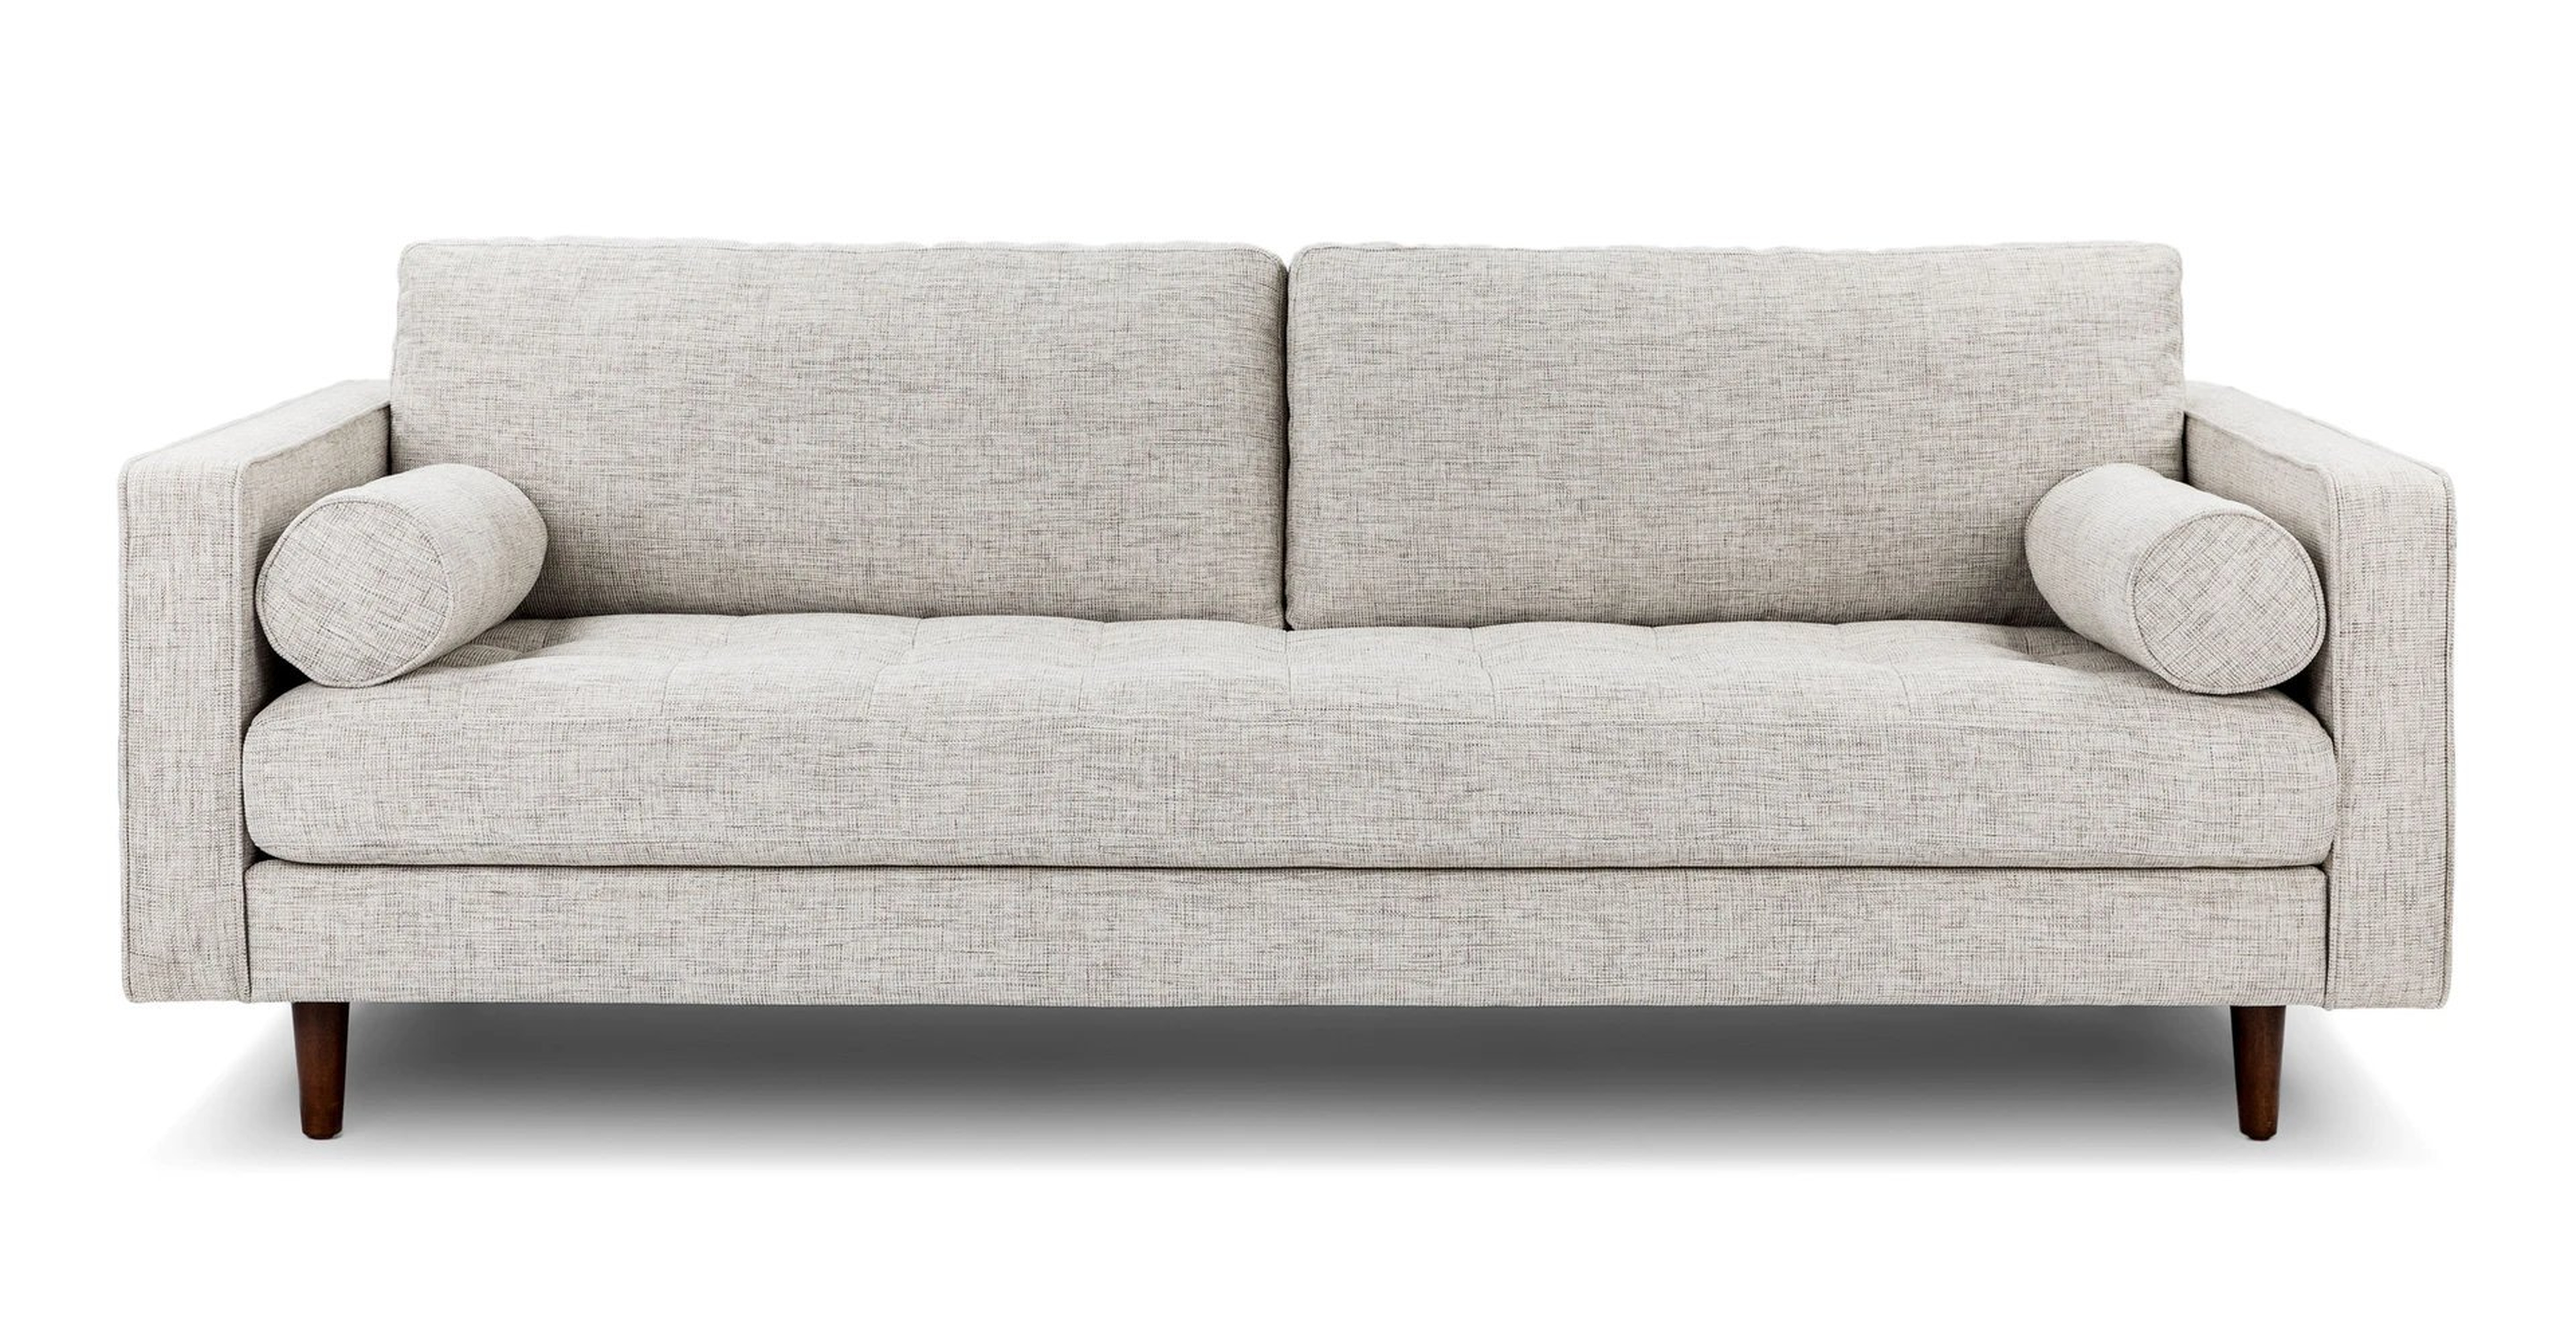 Sven Birch Ivory Sofa, 3+ SEATERS - Article